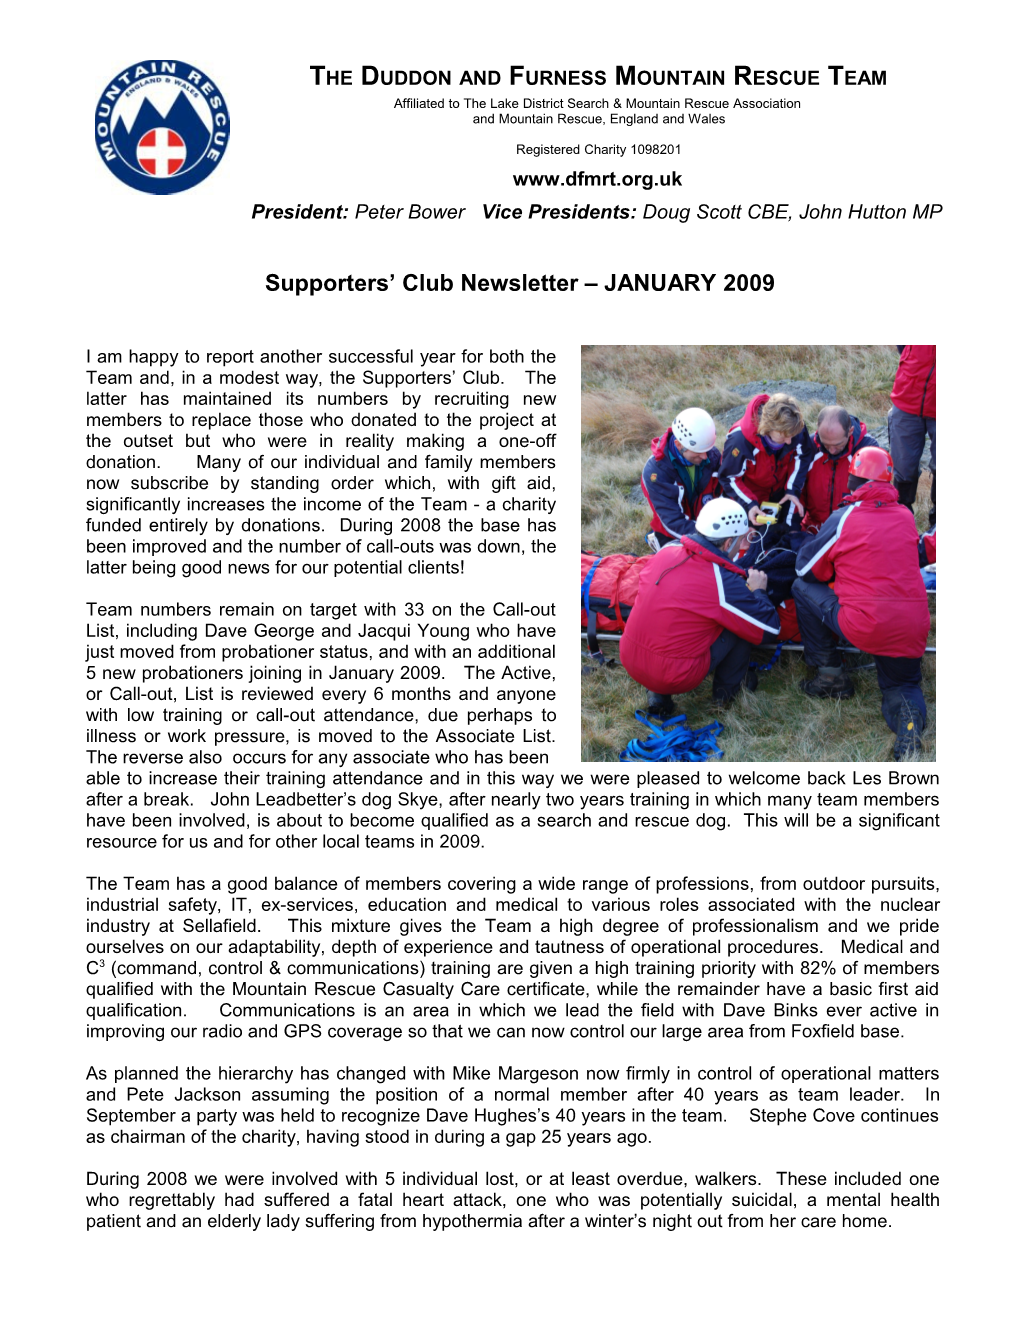 Supporters Club Newsletter JANUARY 2009